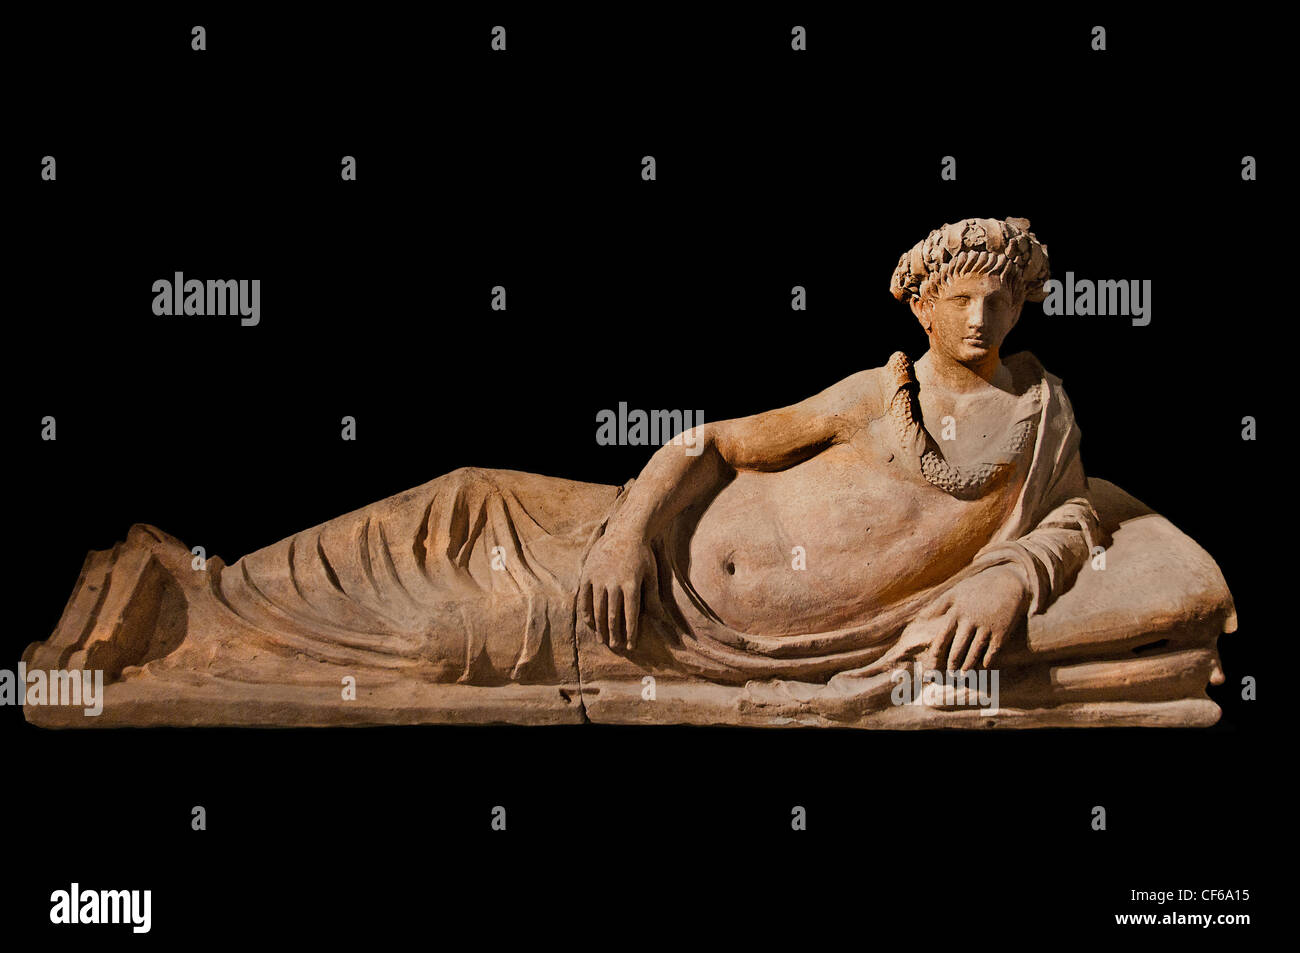 Sarcophagus Etruscan male figure half extended 3 century BC Tuscany Italy Stock Photo